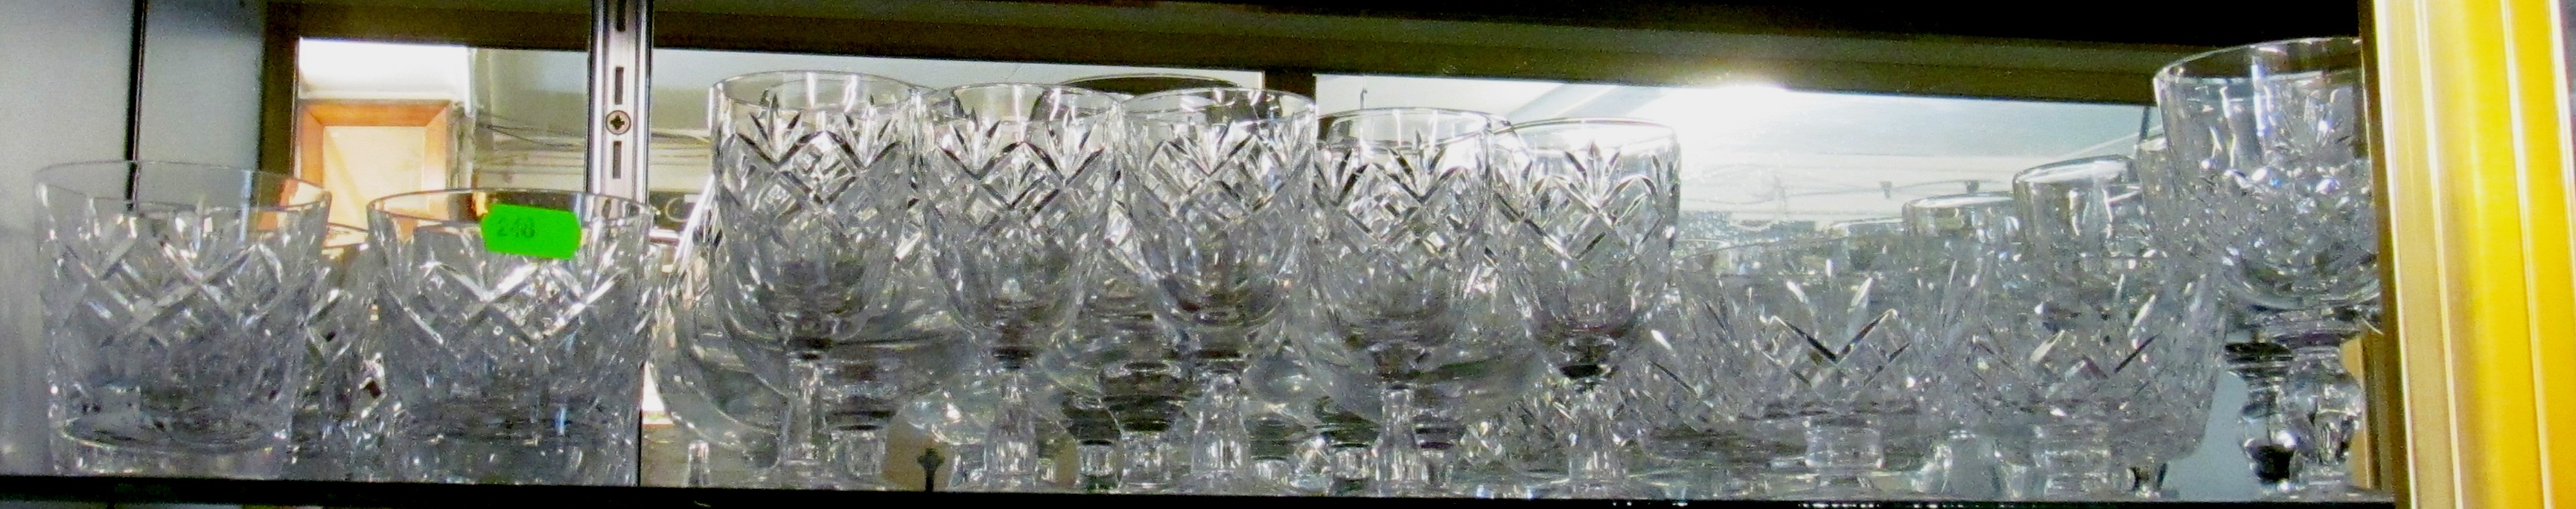 Six Royal Doulton crystal tumblers, six cut glass wine glasses and other drinking glasses - Image 2 of 2